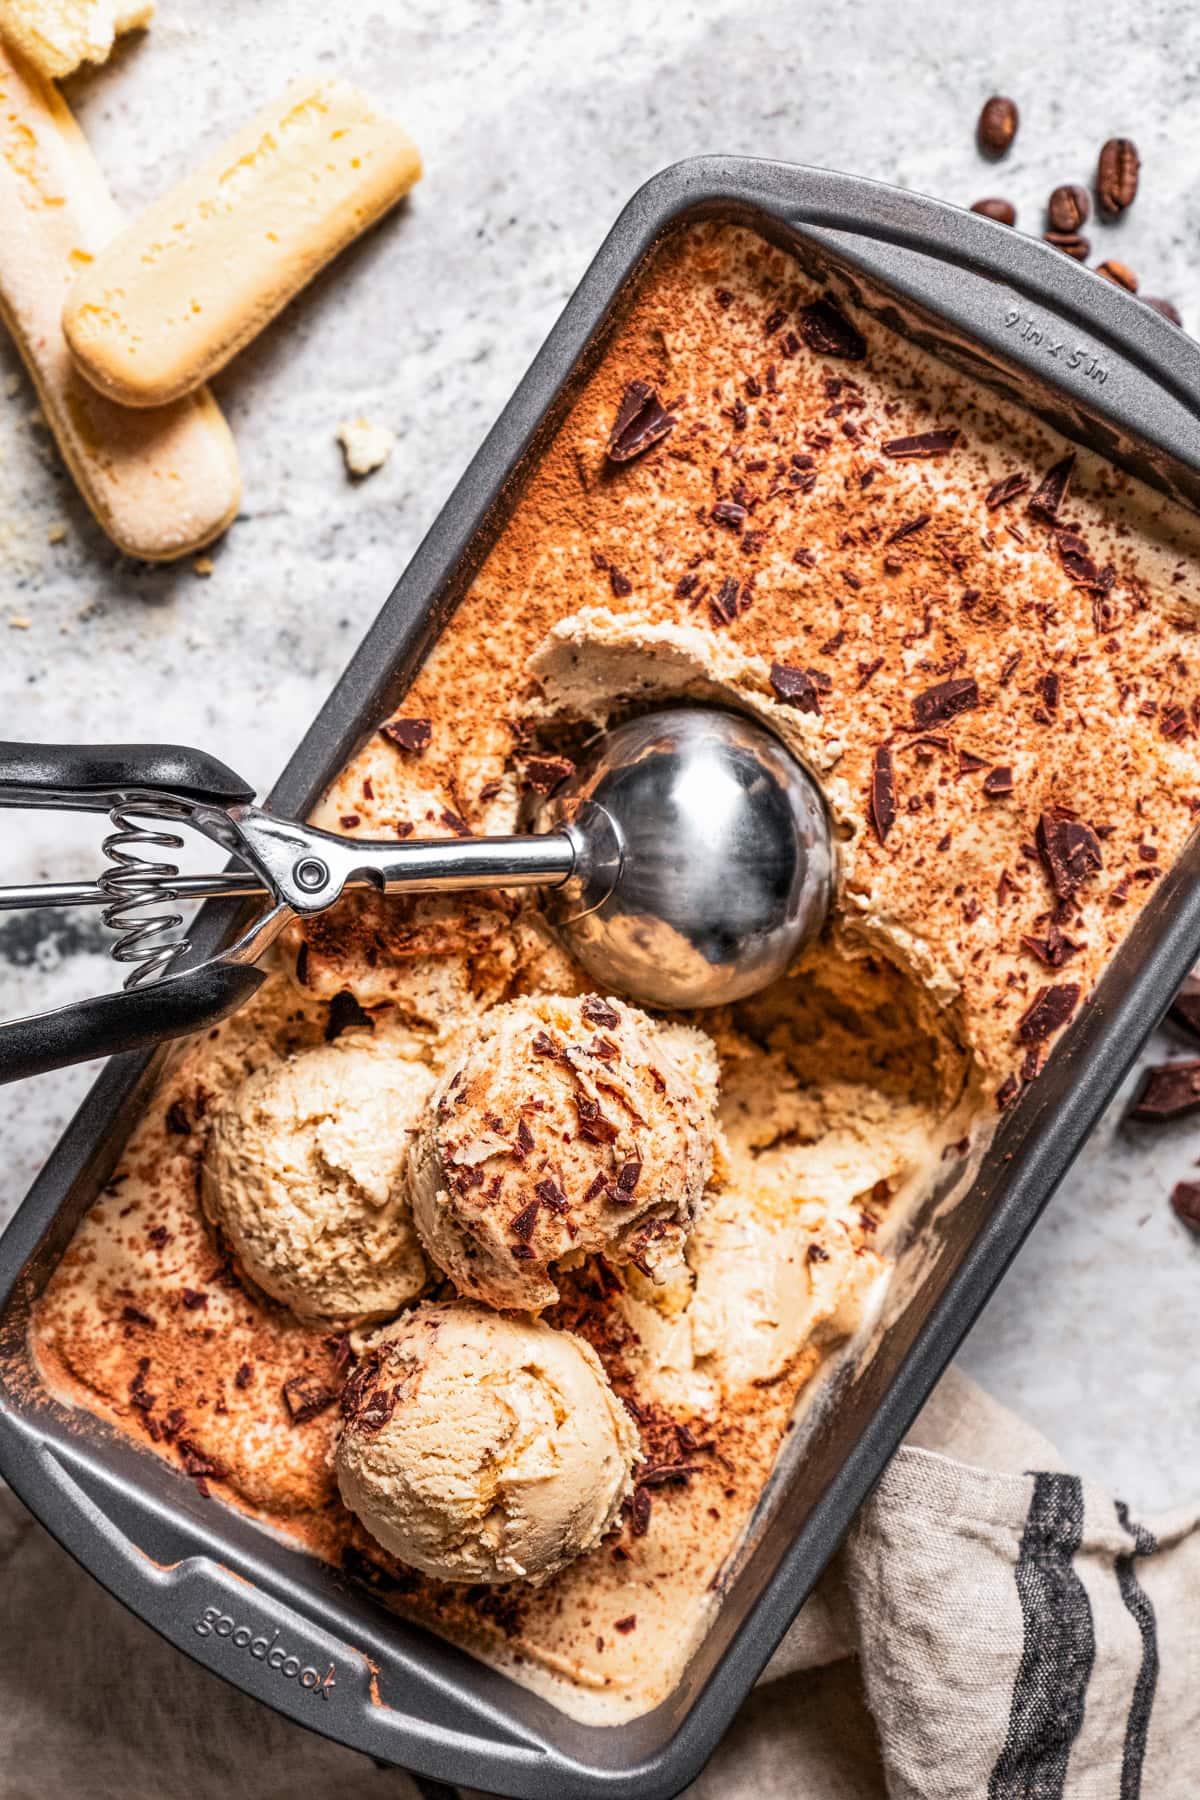 Overhead view of tiramisu ice cream in a loaf pan, with an ice cream scoop.